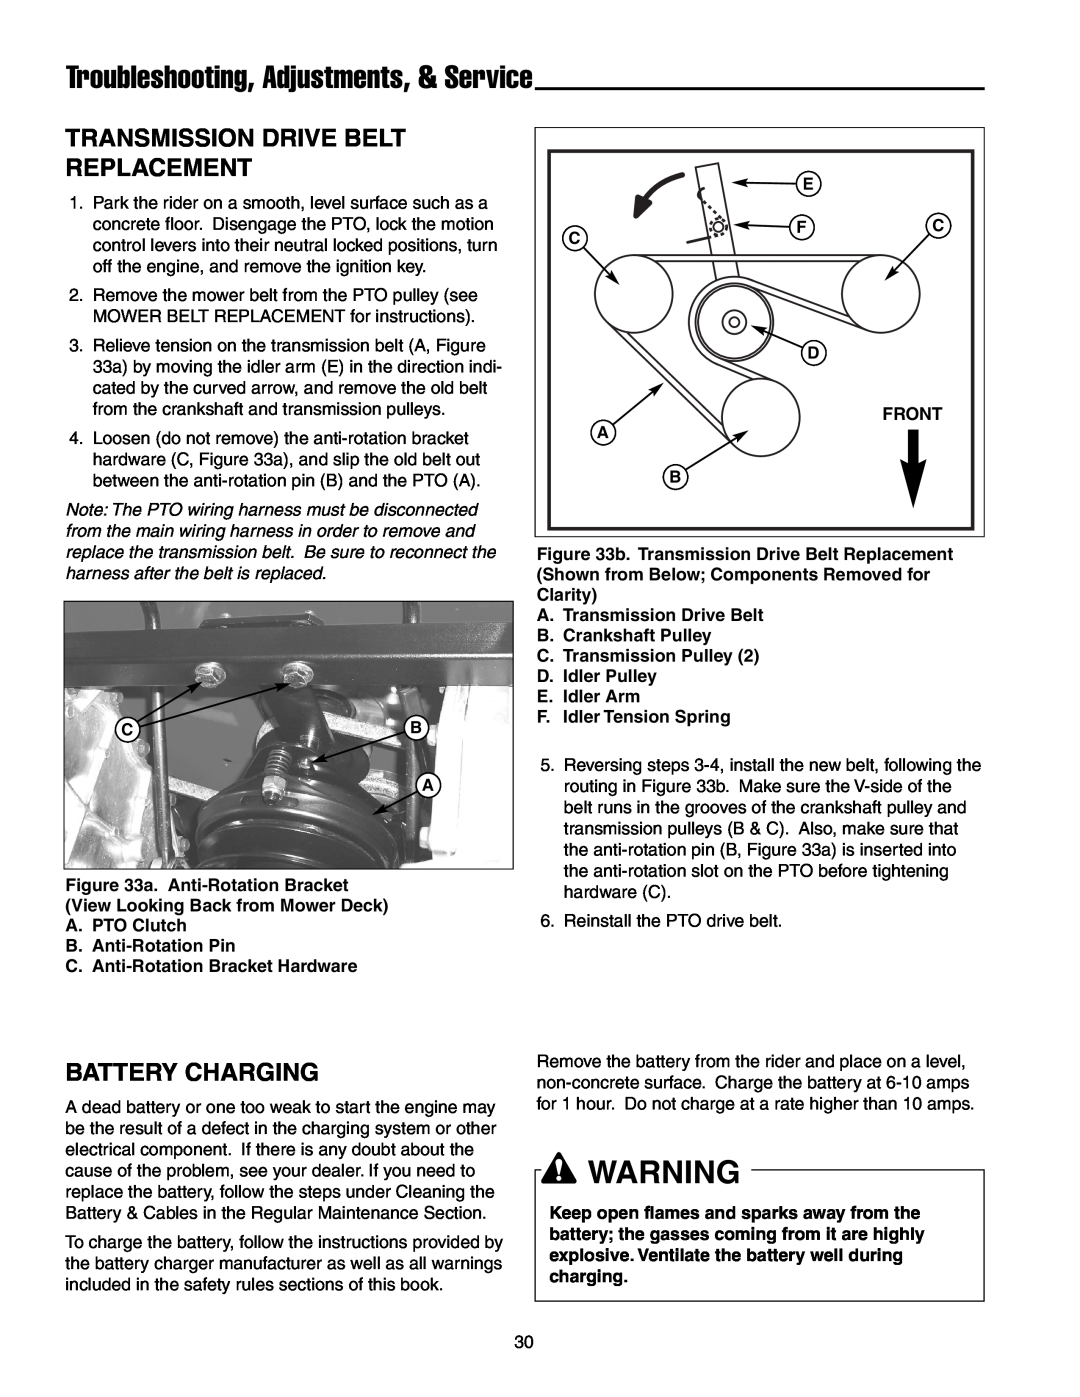 Simplicity 250 Z Transmission Drive Belt Replacement, Battery Charging, Troubleshooting, Adjustments, & Service, Cb A 